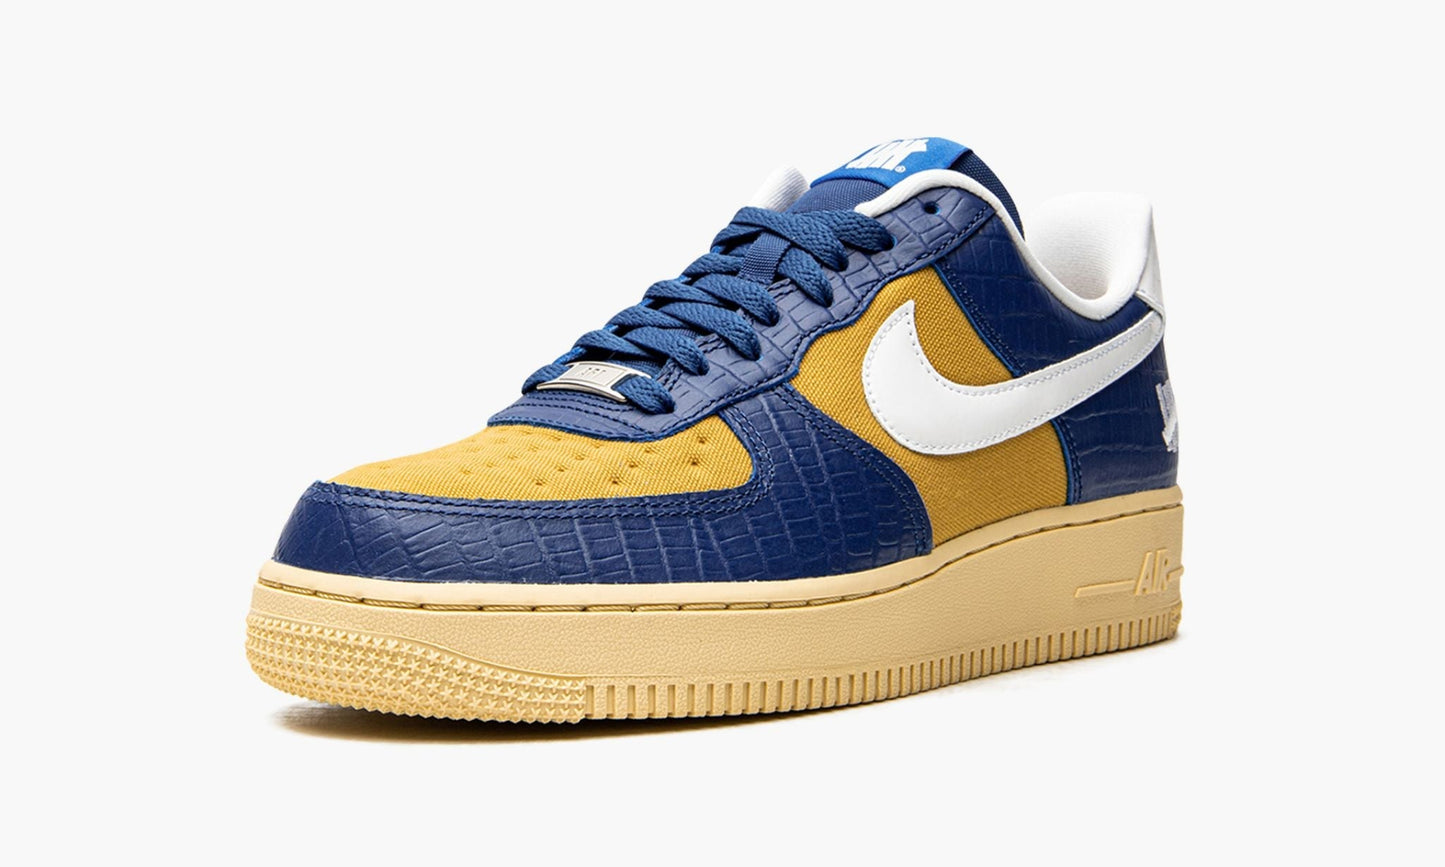 Air Force 1 Low "Undefeated -  Blue Croc"